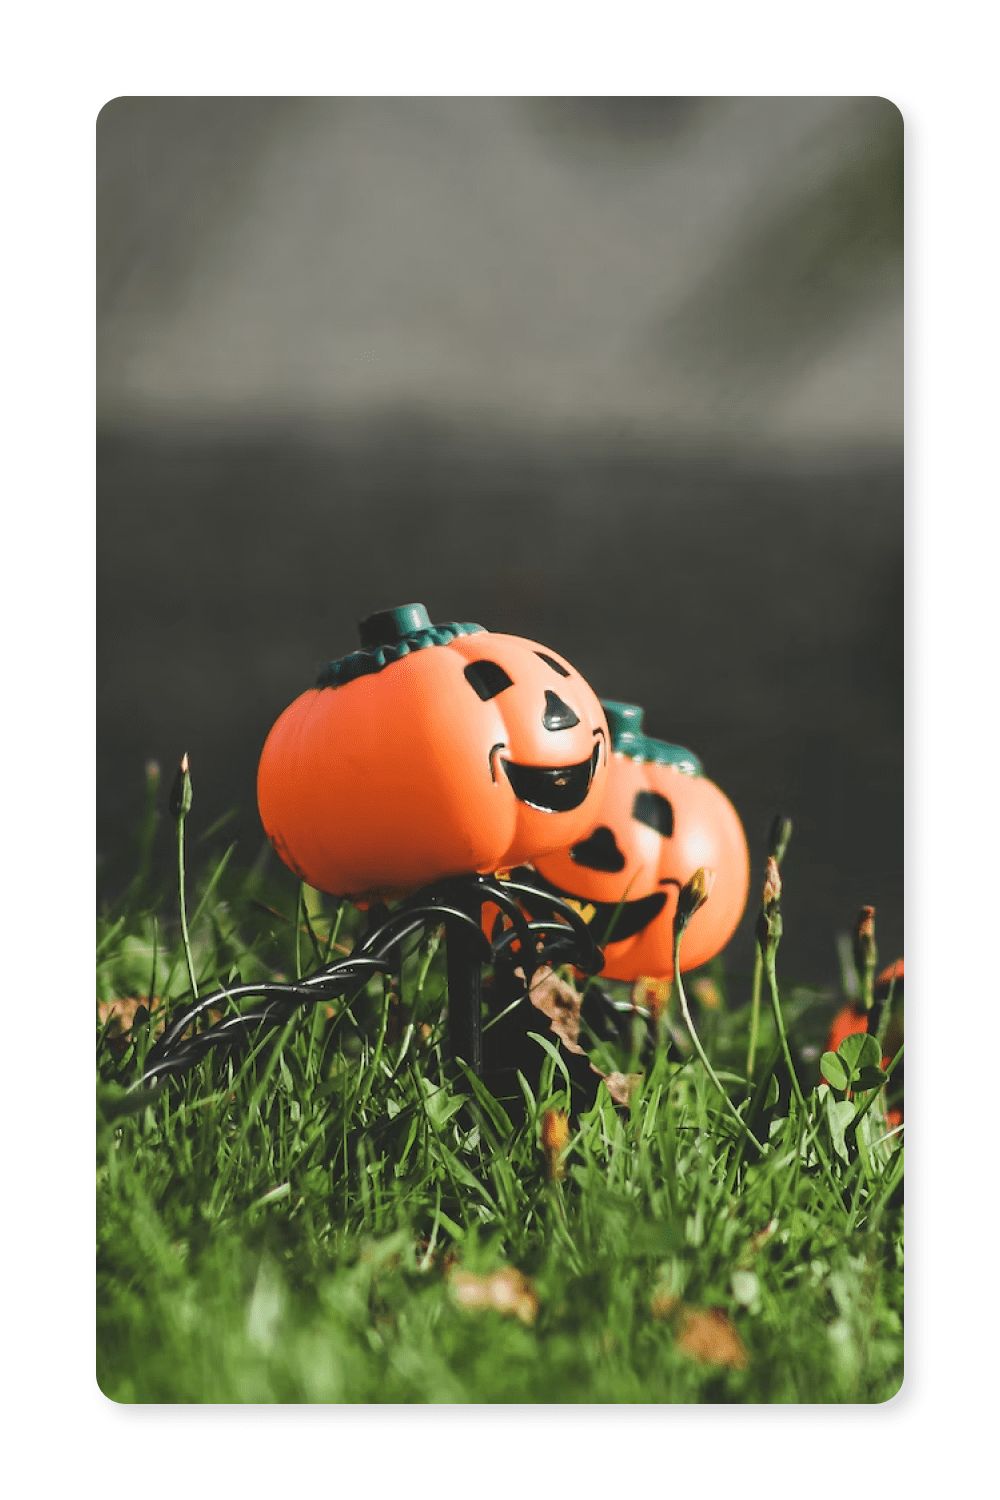 Photo of two plastic pumpkins in the grass.